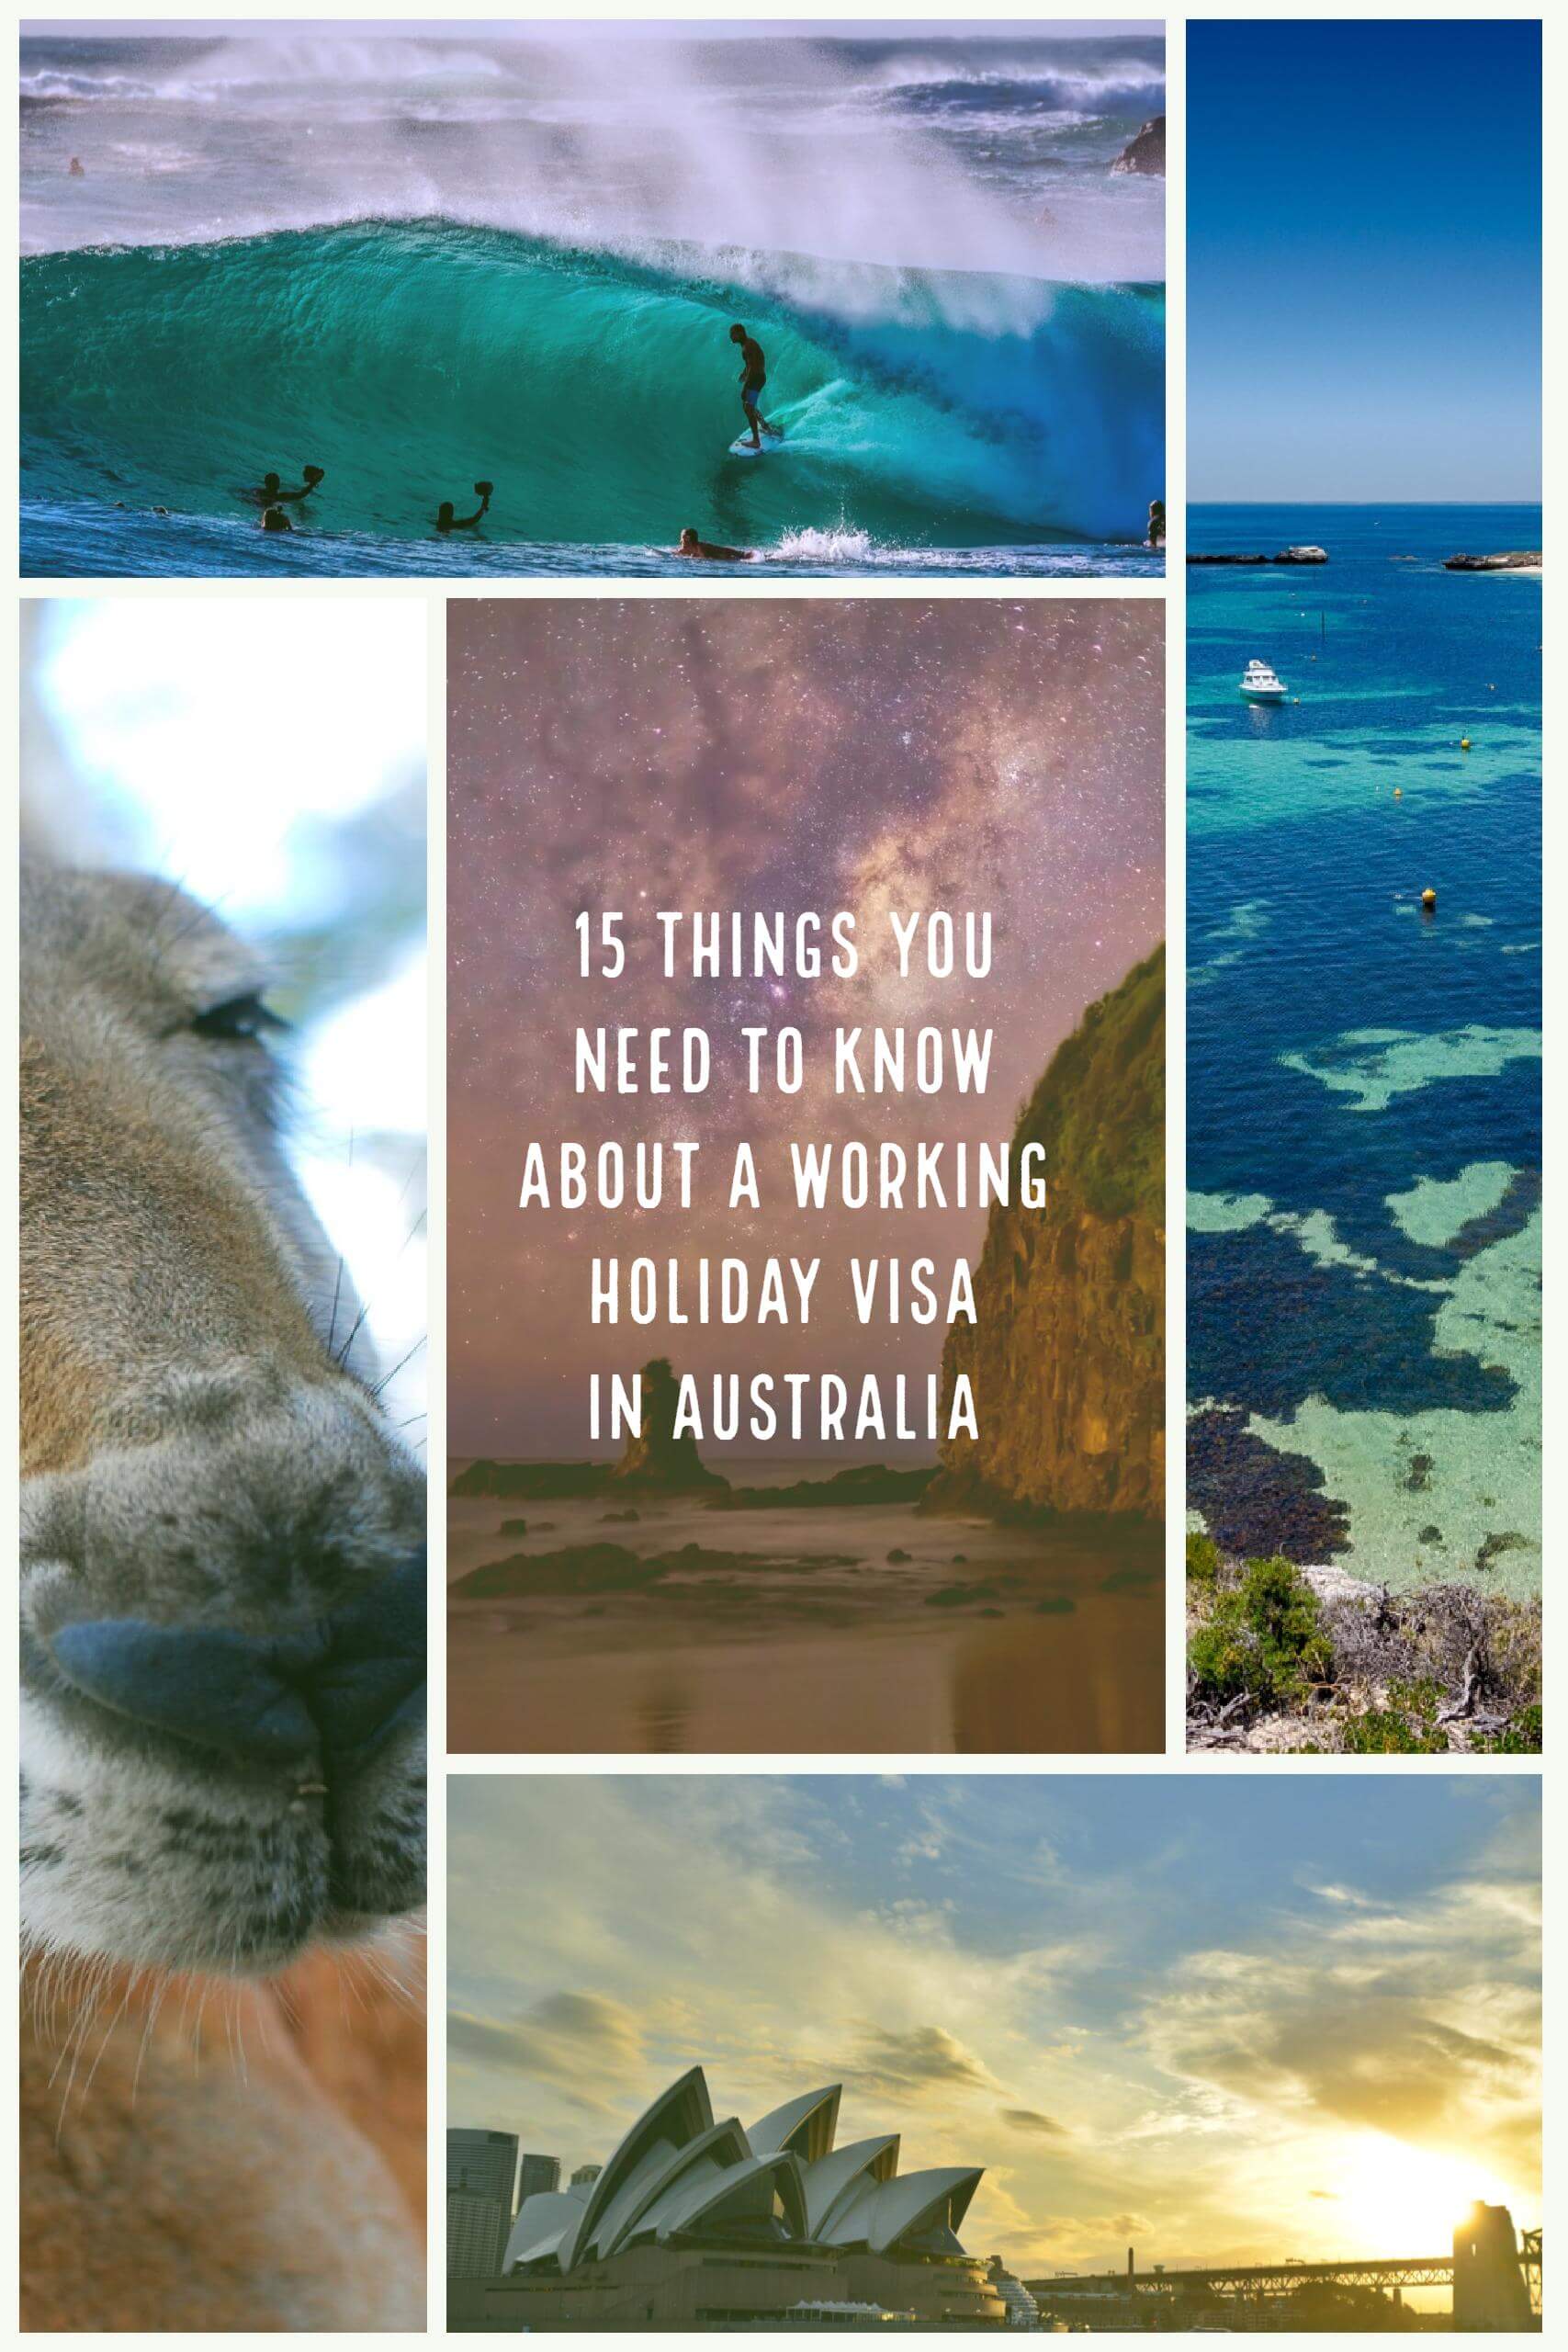 15 Things You Need To Know About A Working Holiday Visa In Australia